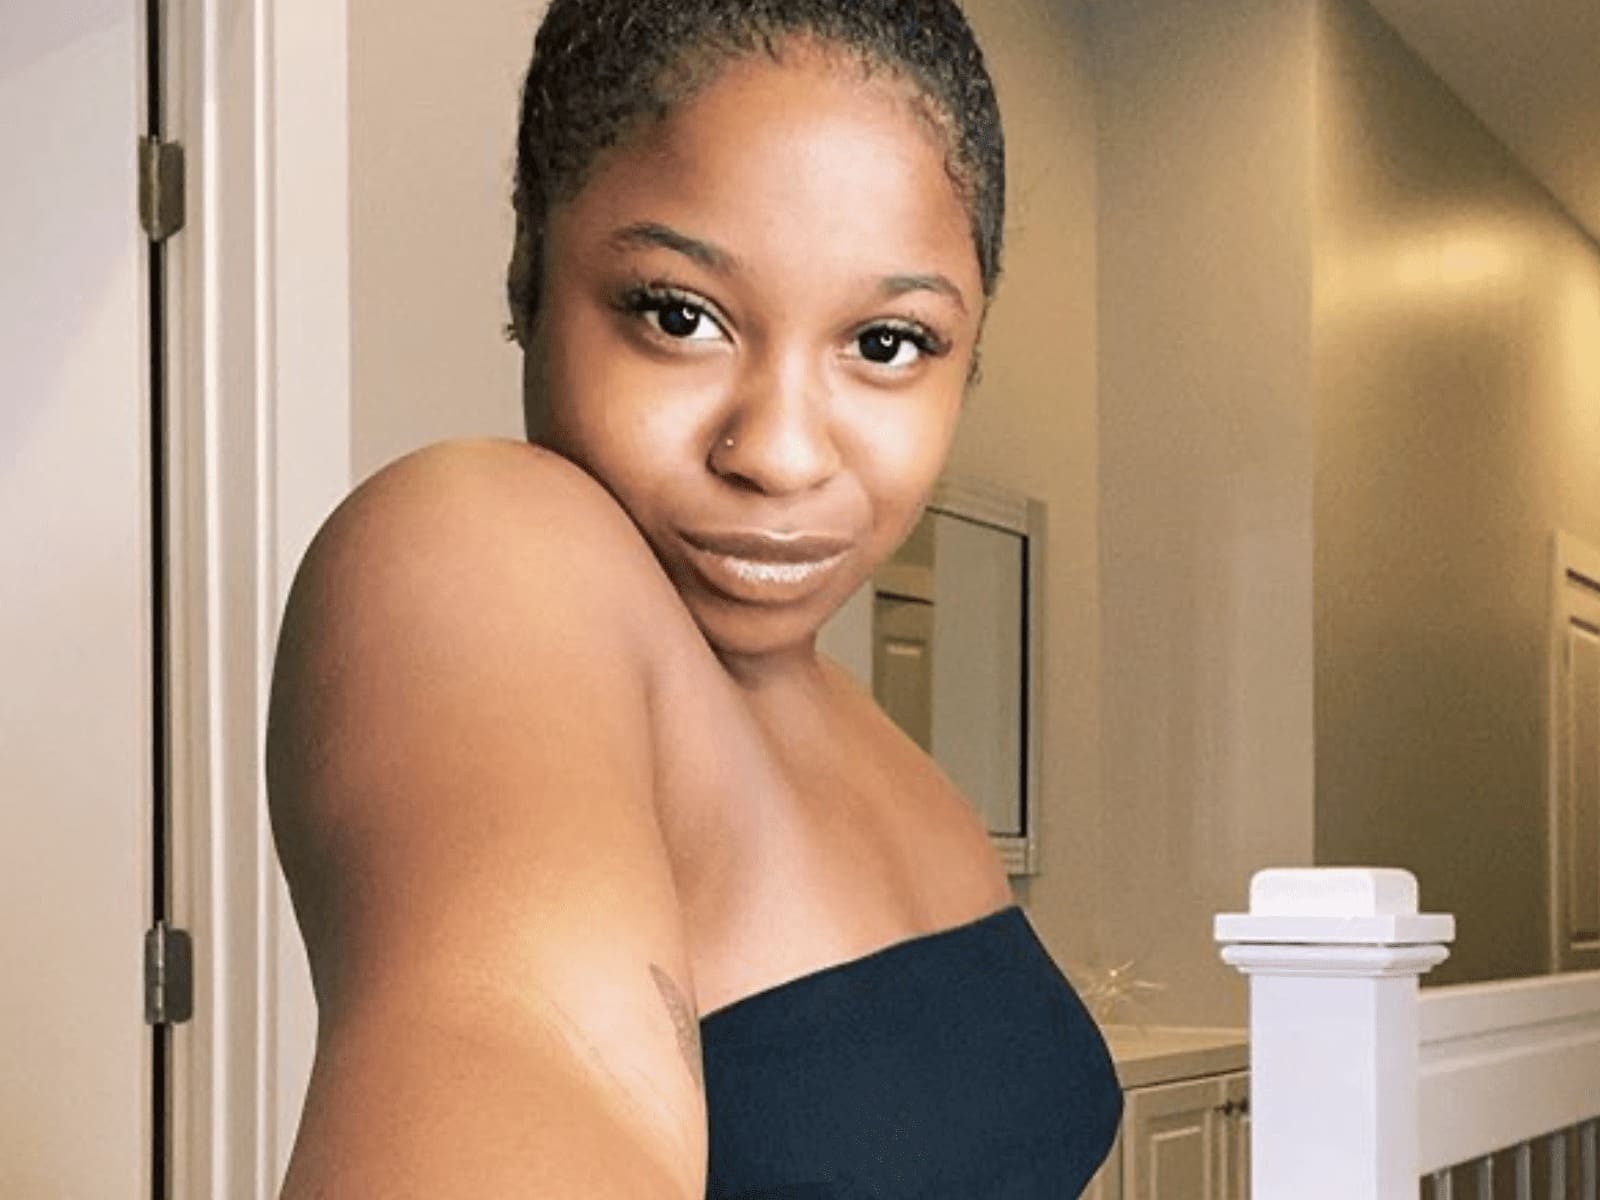 Toya Johnson's Daughter, Reginae Carter Looks Amazing In This Jaw-Dropping Skin-Tight Black Outfit